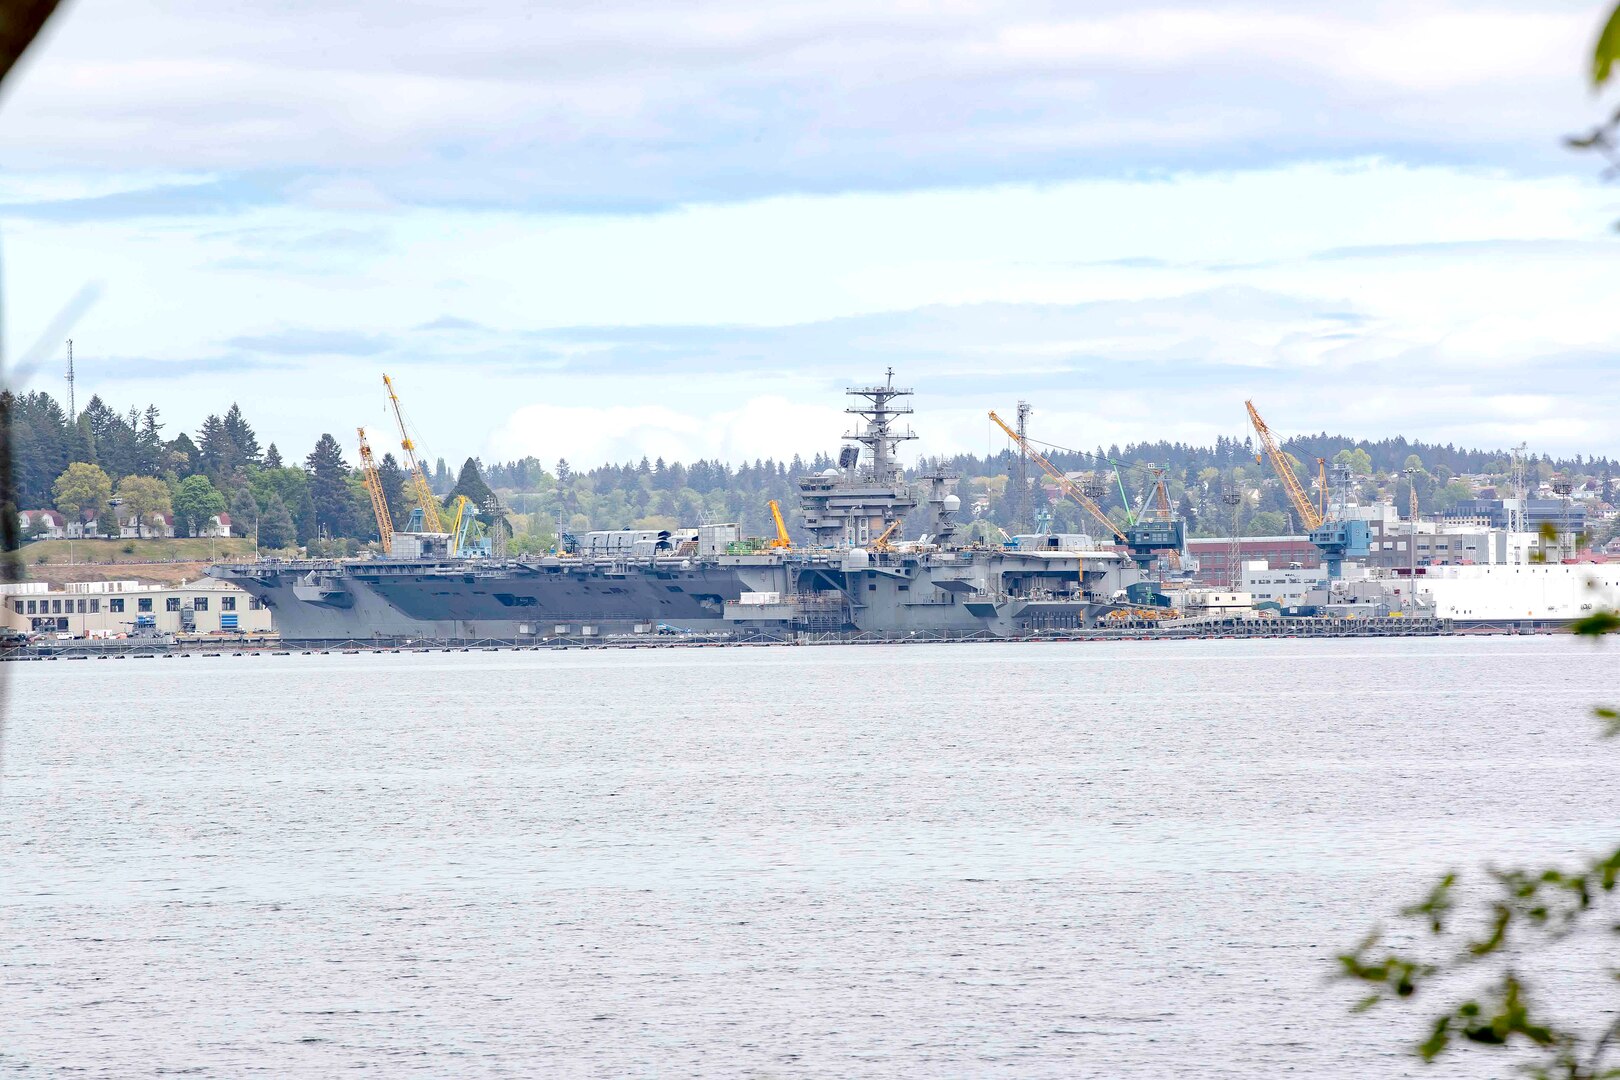 USS Nimitz (CVN 68) began its six-month Planned Incremental Availability May 10, 2021, at Puget Sound Naval Shipyard & Intermediate Maintenance Facility, in Bremerton, Washington. The project is expected to take about 330,000 man-days to complete. (PSNS & IMF photo by Kenneth G. Takada)